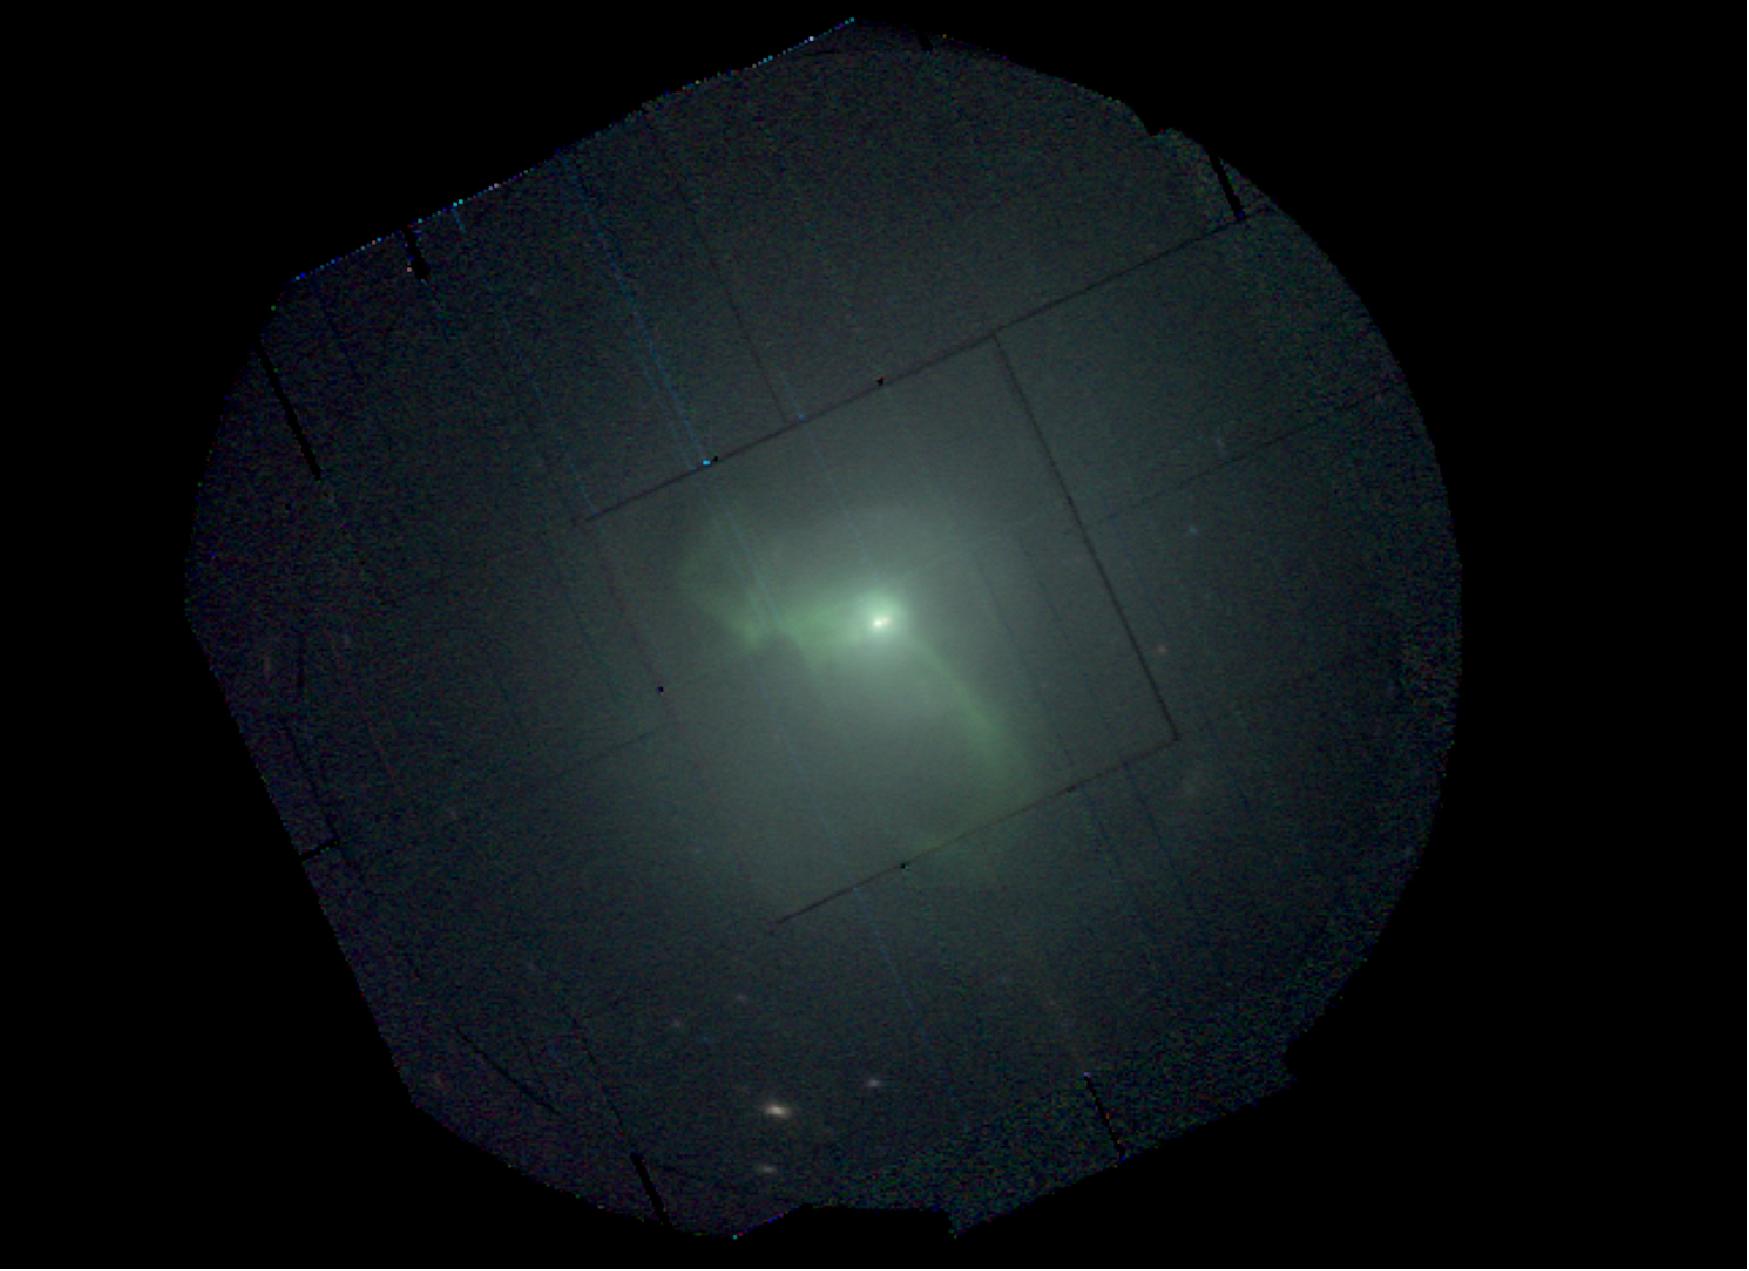 Figure 44: The core of massive galaxy M87 as viewed in X-rays by ESA’s XMM-Newton space observatory. A giant elliptical galaxy, M87 is home to several trillion stars, making it one of the most massive galaxies in the local Universe. About 52 million light years away, it is located at the center of the Virgo cluster, the nearest cluster of galaxies to the Local Group, to which our own Milky Way galaxy belongs. A supermassive black hole as massive as billions of stars like our Sun sits at the core of M87, accreting material from its surroundings at an extremely intense rate. The black hole’s accretion produces powerful jets that launch energetic particles close to the speed of light outwards into the surrounding cluster environment, as well as inflating giant bubbles that lift cooler gas from the cluster center and form the filamentary structures visible in this image. The activity of the black hole also generates shock waves, such as the circular feature that can be seen around the center of the image. This view is based on data collected at X-ray energies between 0.3 and 7 keV with the EPIC (European Photon Imaging Camera) onboard XMM-Newton on 16 July 2017. The image spans 40 arcminutes on each side (image credit: ESA/XMM-Newton; Acknowledgement: P. Rodriguez)